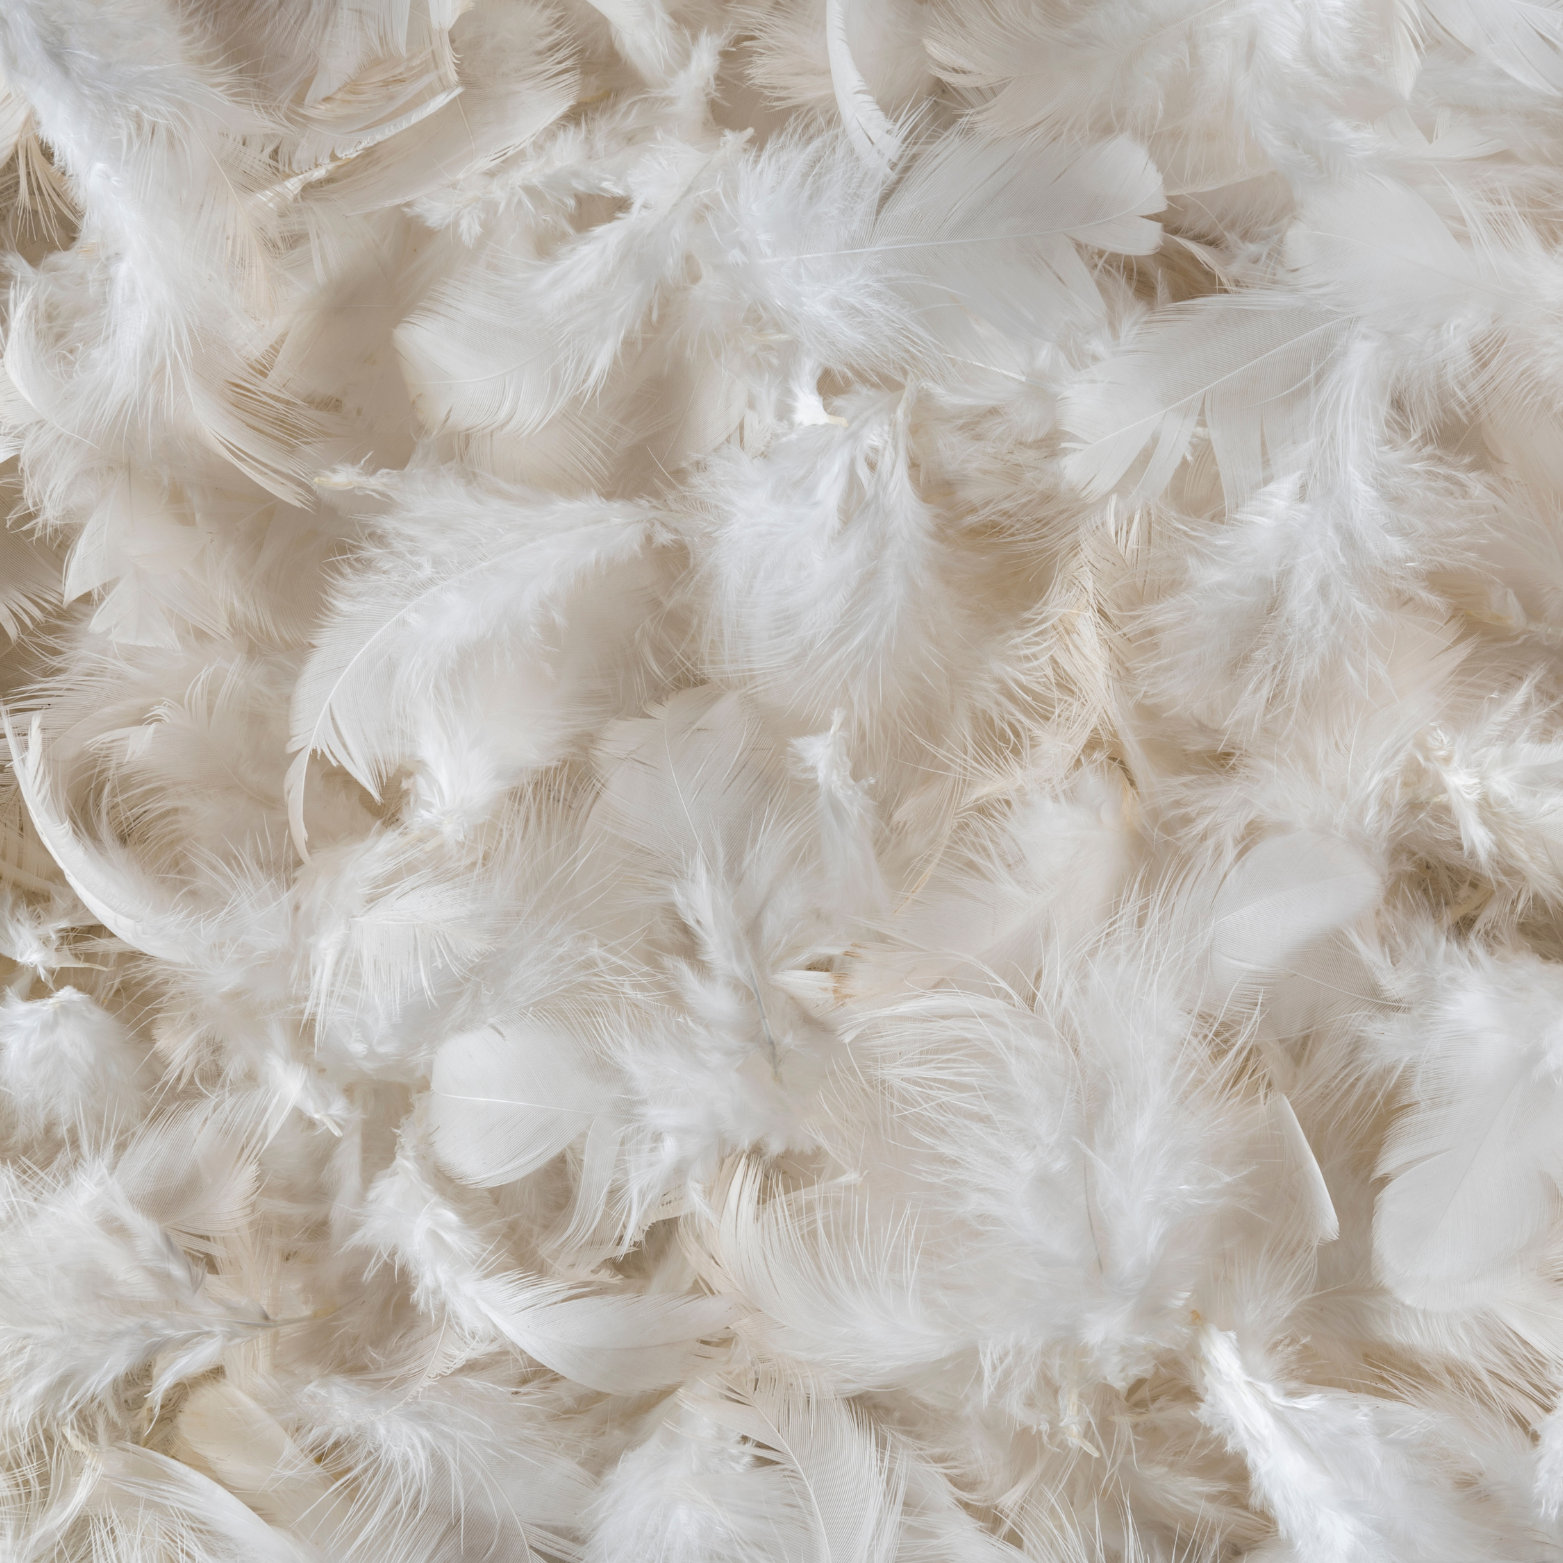 ROSE FEATHER Bulk Goose Down Feather Stuffing & Fill Hypoallergenic Pillow  Filling Repair Restuff Fluff for Couch Cushions Comforters Jackets5/95-4Lb  DIY 1800g(4Lb) 5% White Goose Down